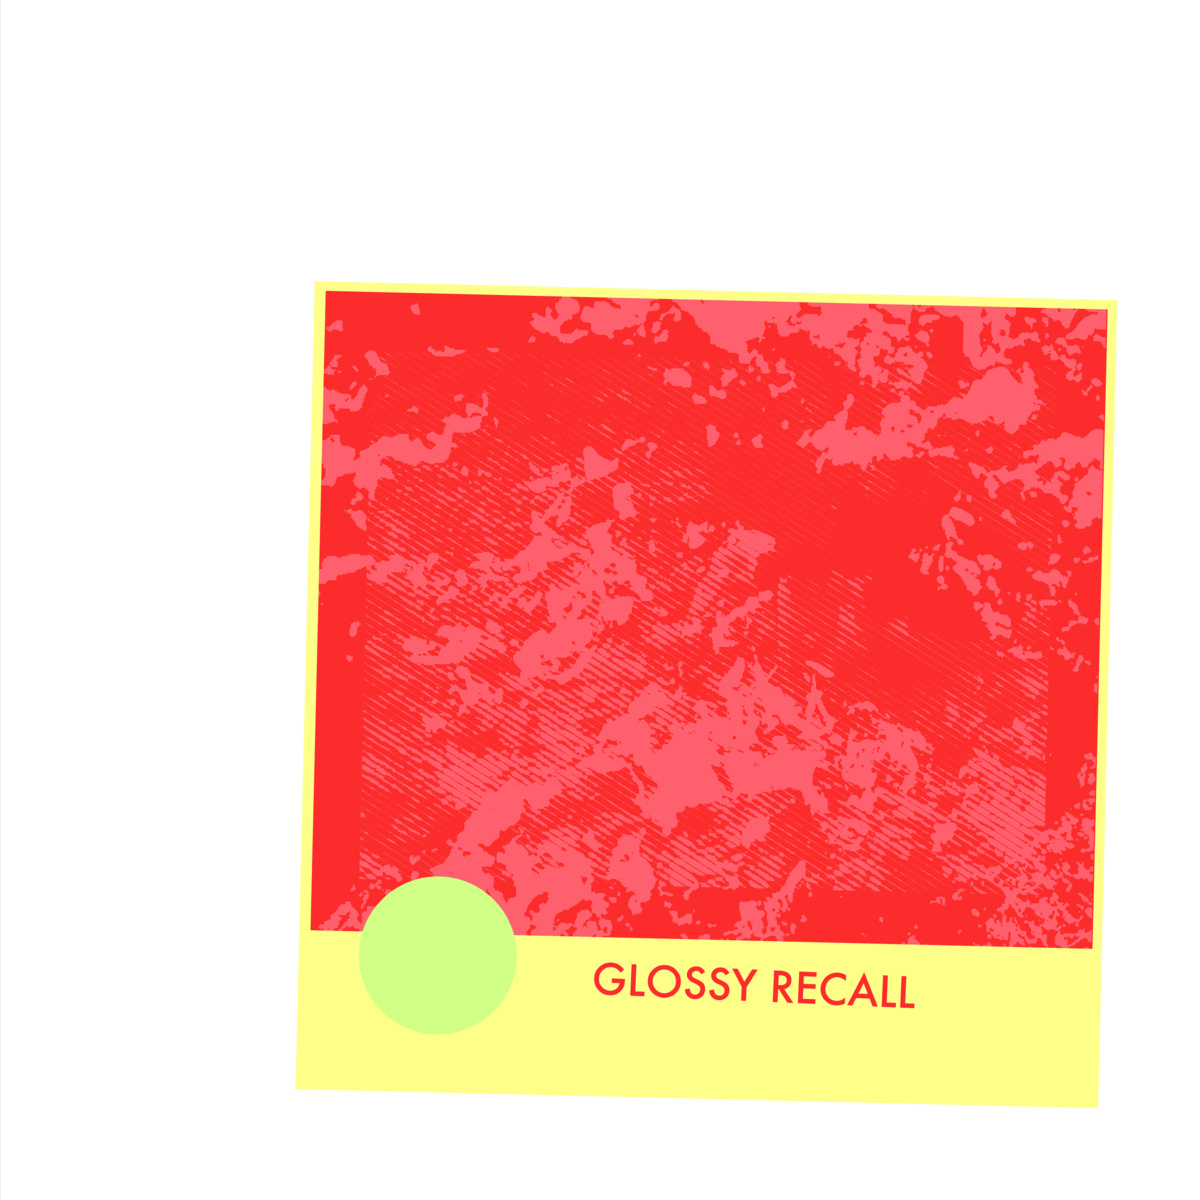 Hungry Cloud Darkening, Glossy Recall (out now, Off Tempo Records, offtempo.bandcamp.com) I